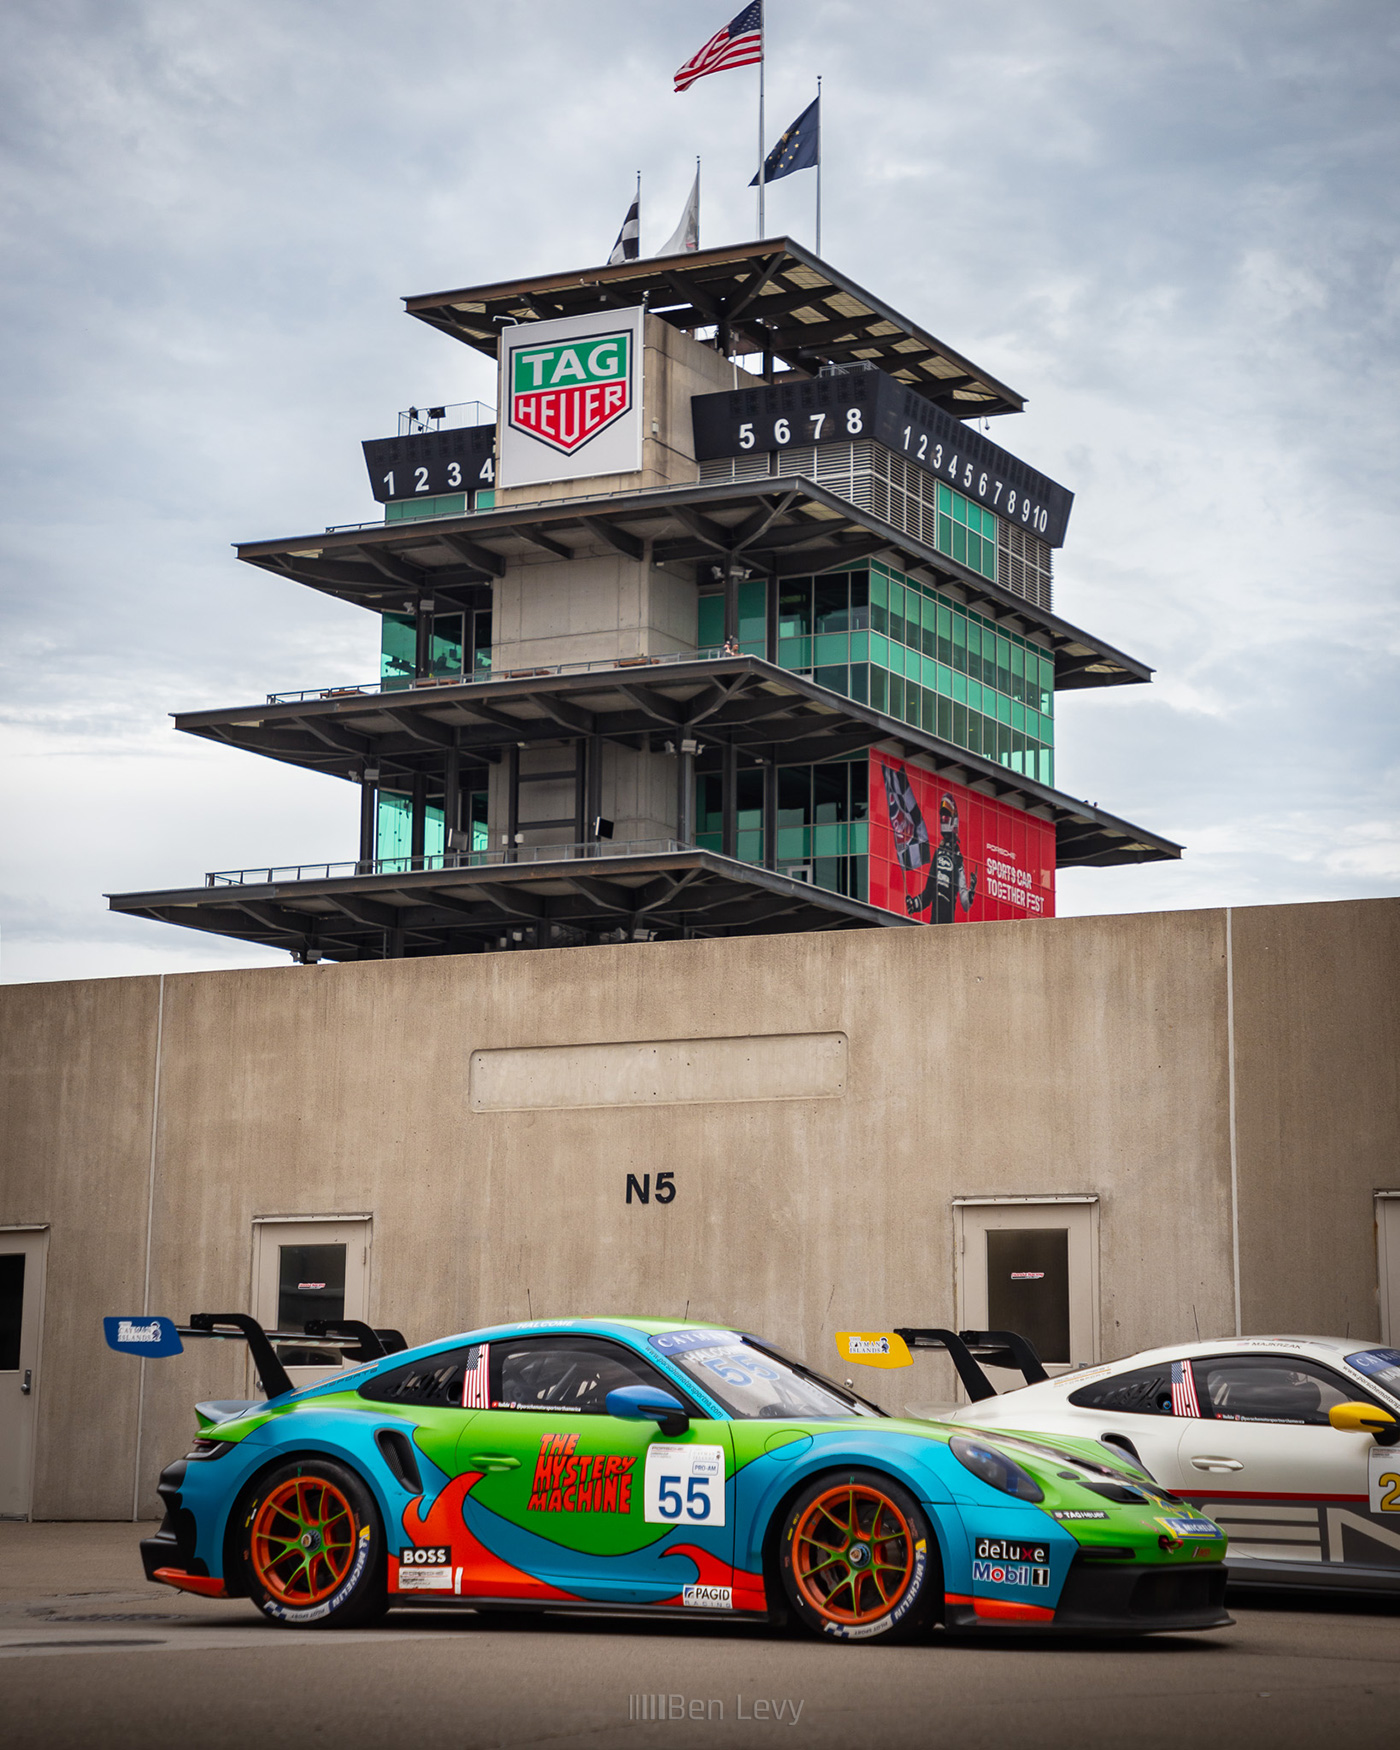 The Mystery Machine, Scooy-Doo Inspired Porsche 911 GT3